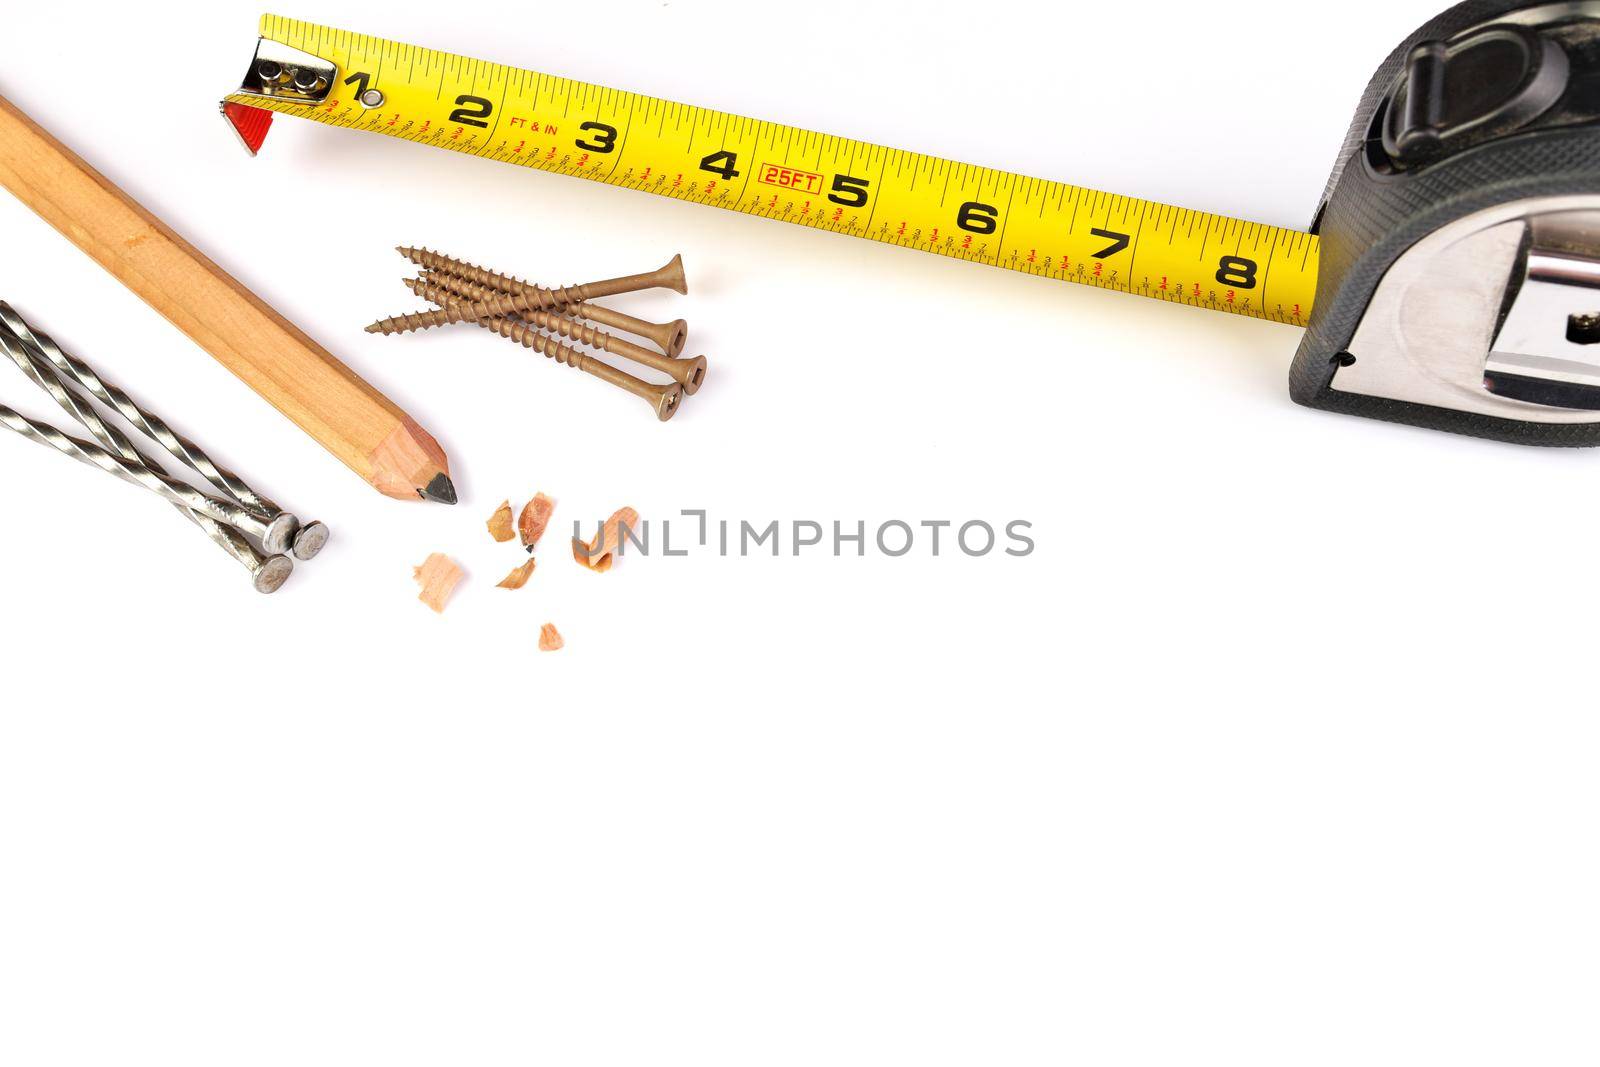 Carpenter's Pencil with Sharpening Shavings, Tape Measure, Framing Nails and Deck Screws by markvandam